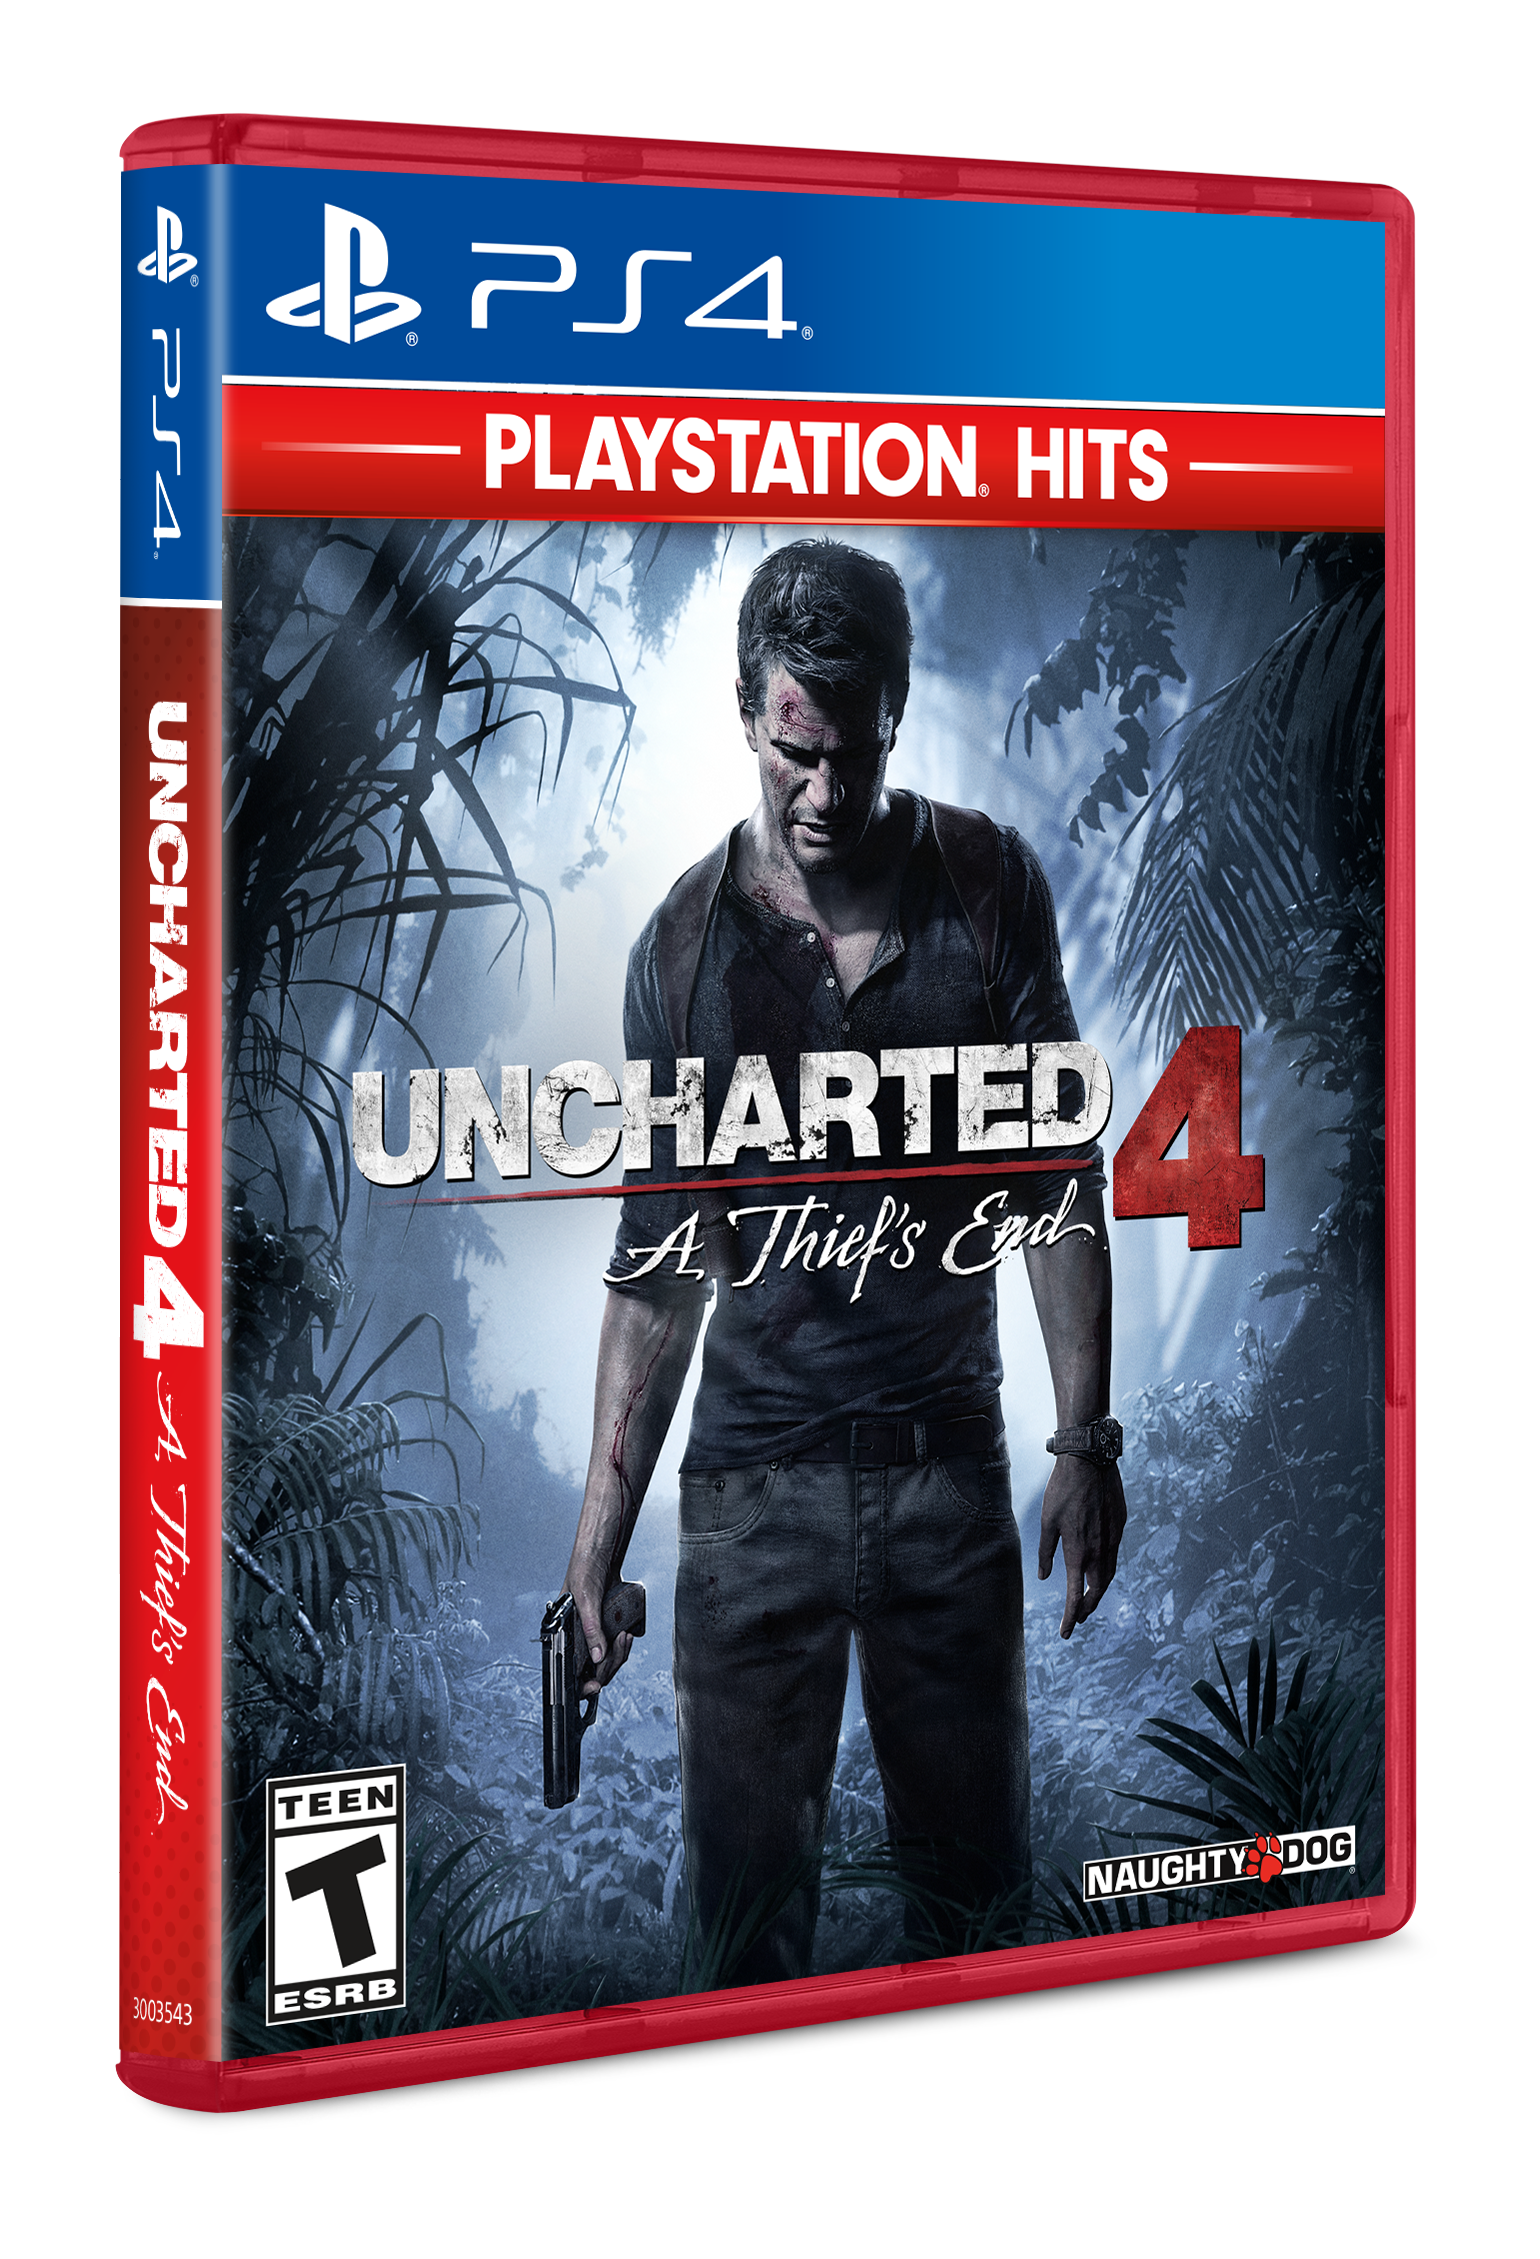 Uncharted 4: A Thief's End - PlayStation Hits, Sony, PlayStation 4, 711719523215 - image 2 of 2